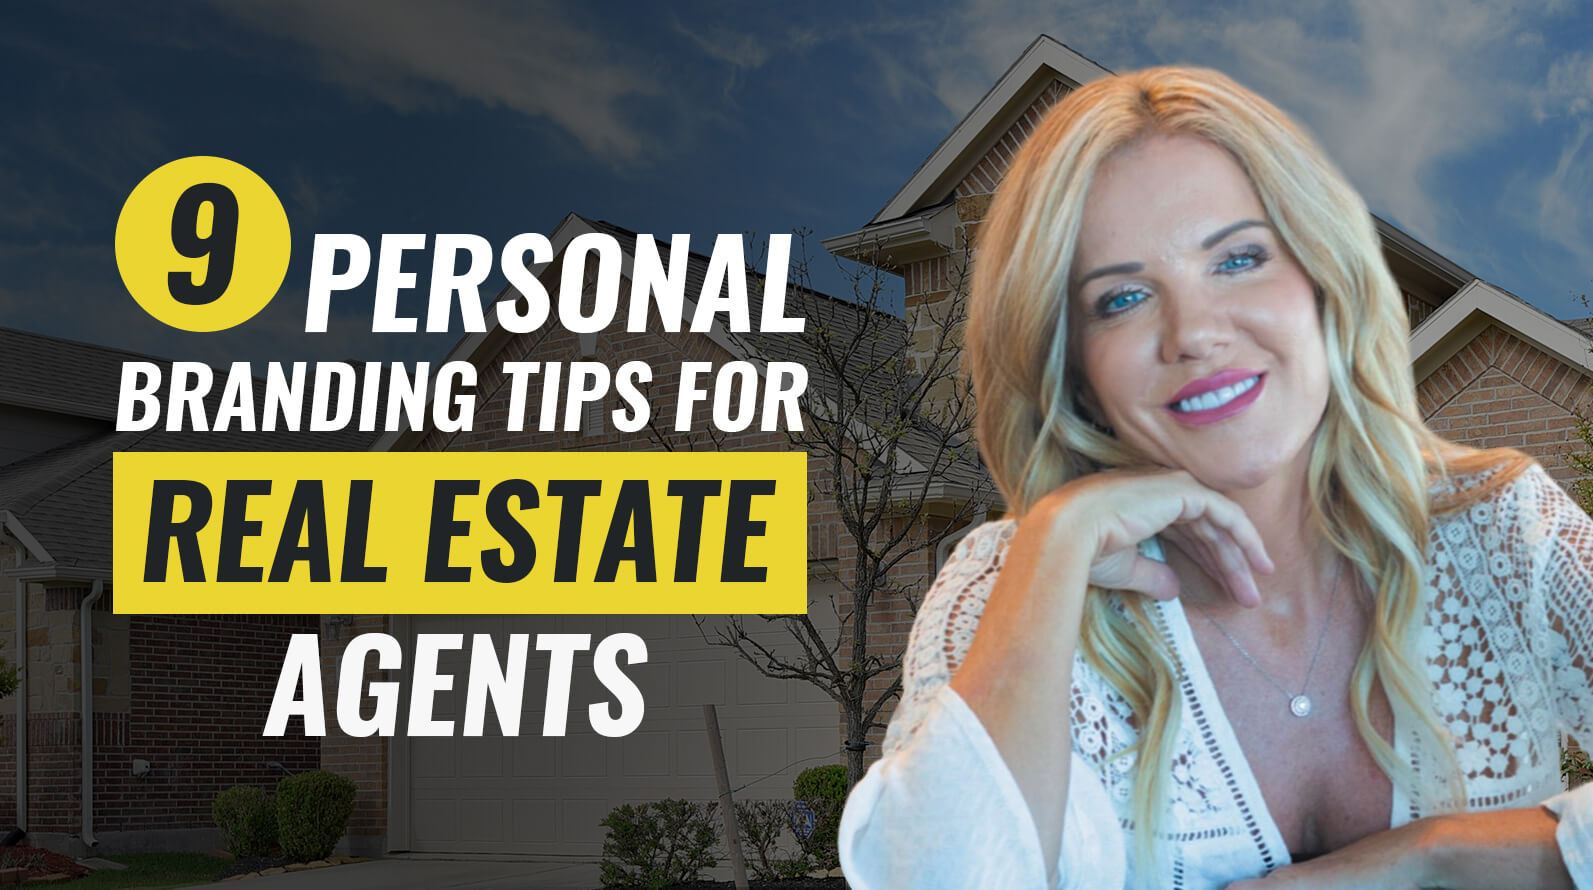 9 Personal Branding Tips For Real Estate Agents